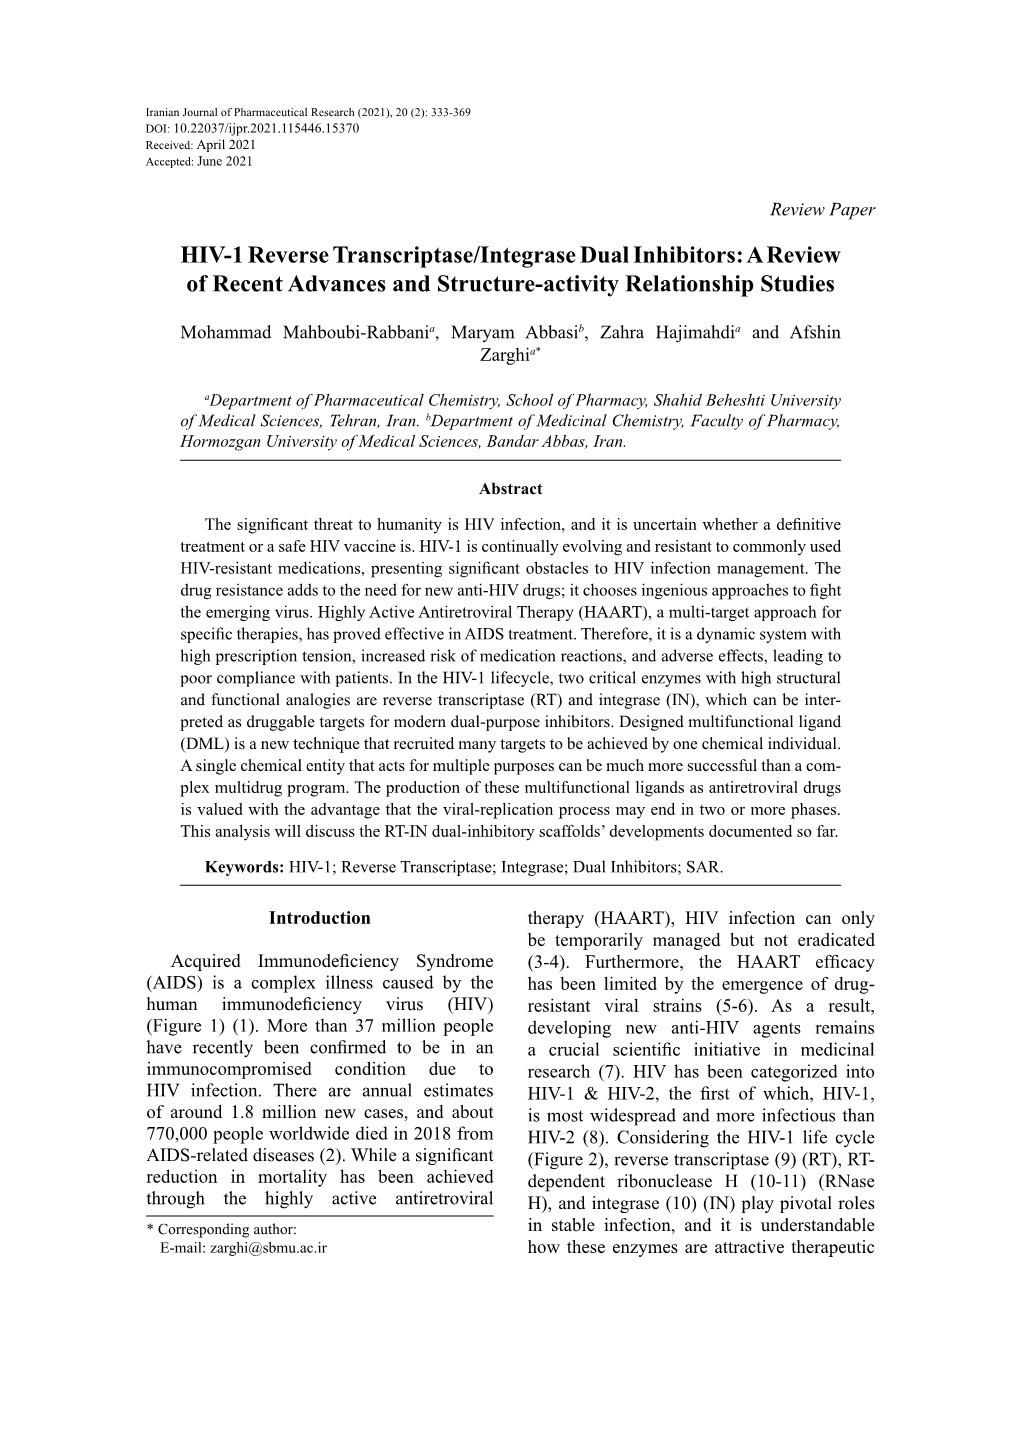 HIV-1 Reverse Transcriptase/Integrase Dual Inhibitors: a Review of Recent Advances and Structure-Activity Relationship Studies